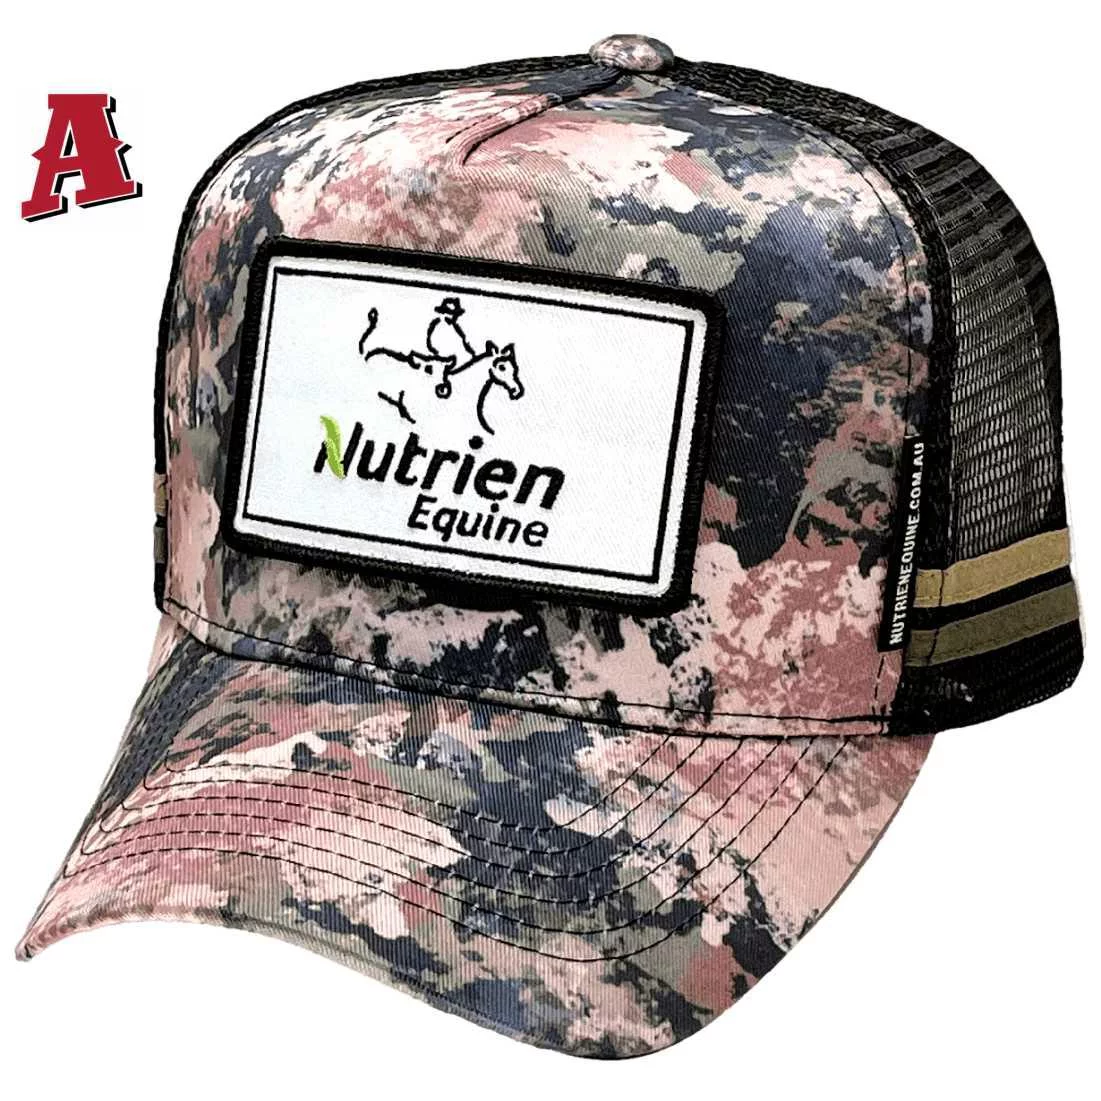 Nutrien Equine Classic Camo Tamworth NSW HP Aussie Midrange Trucker Hats with Australian Head Fit Crown with Double Sidebands Saigon Substrate Camo